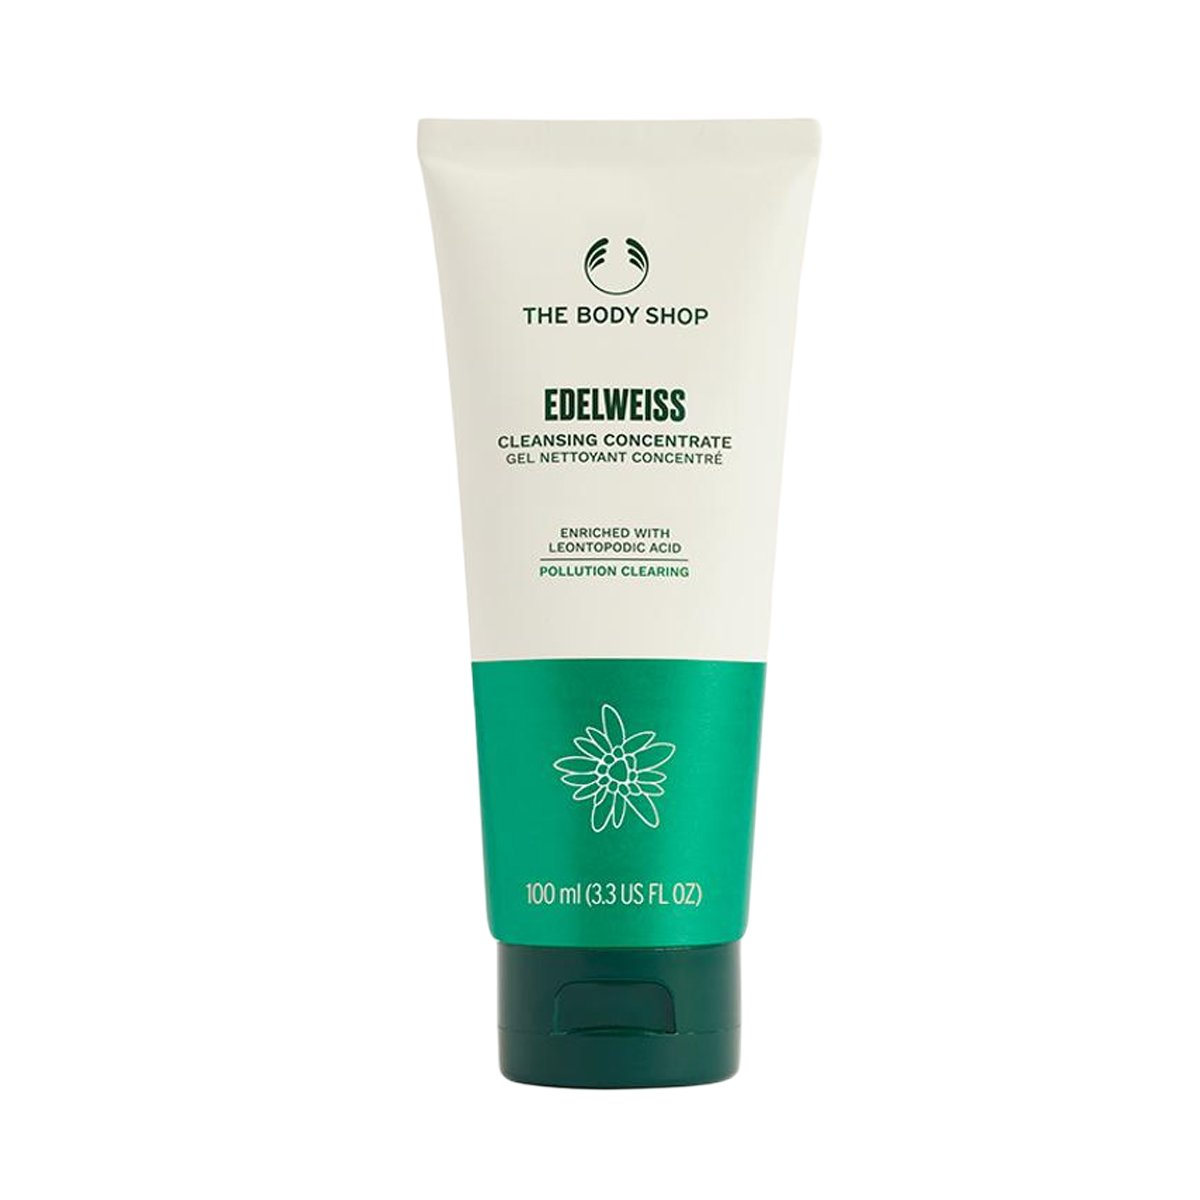 The Body Shop Edelweiss Cleansing Concentrate-100Ml